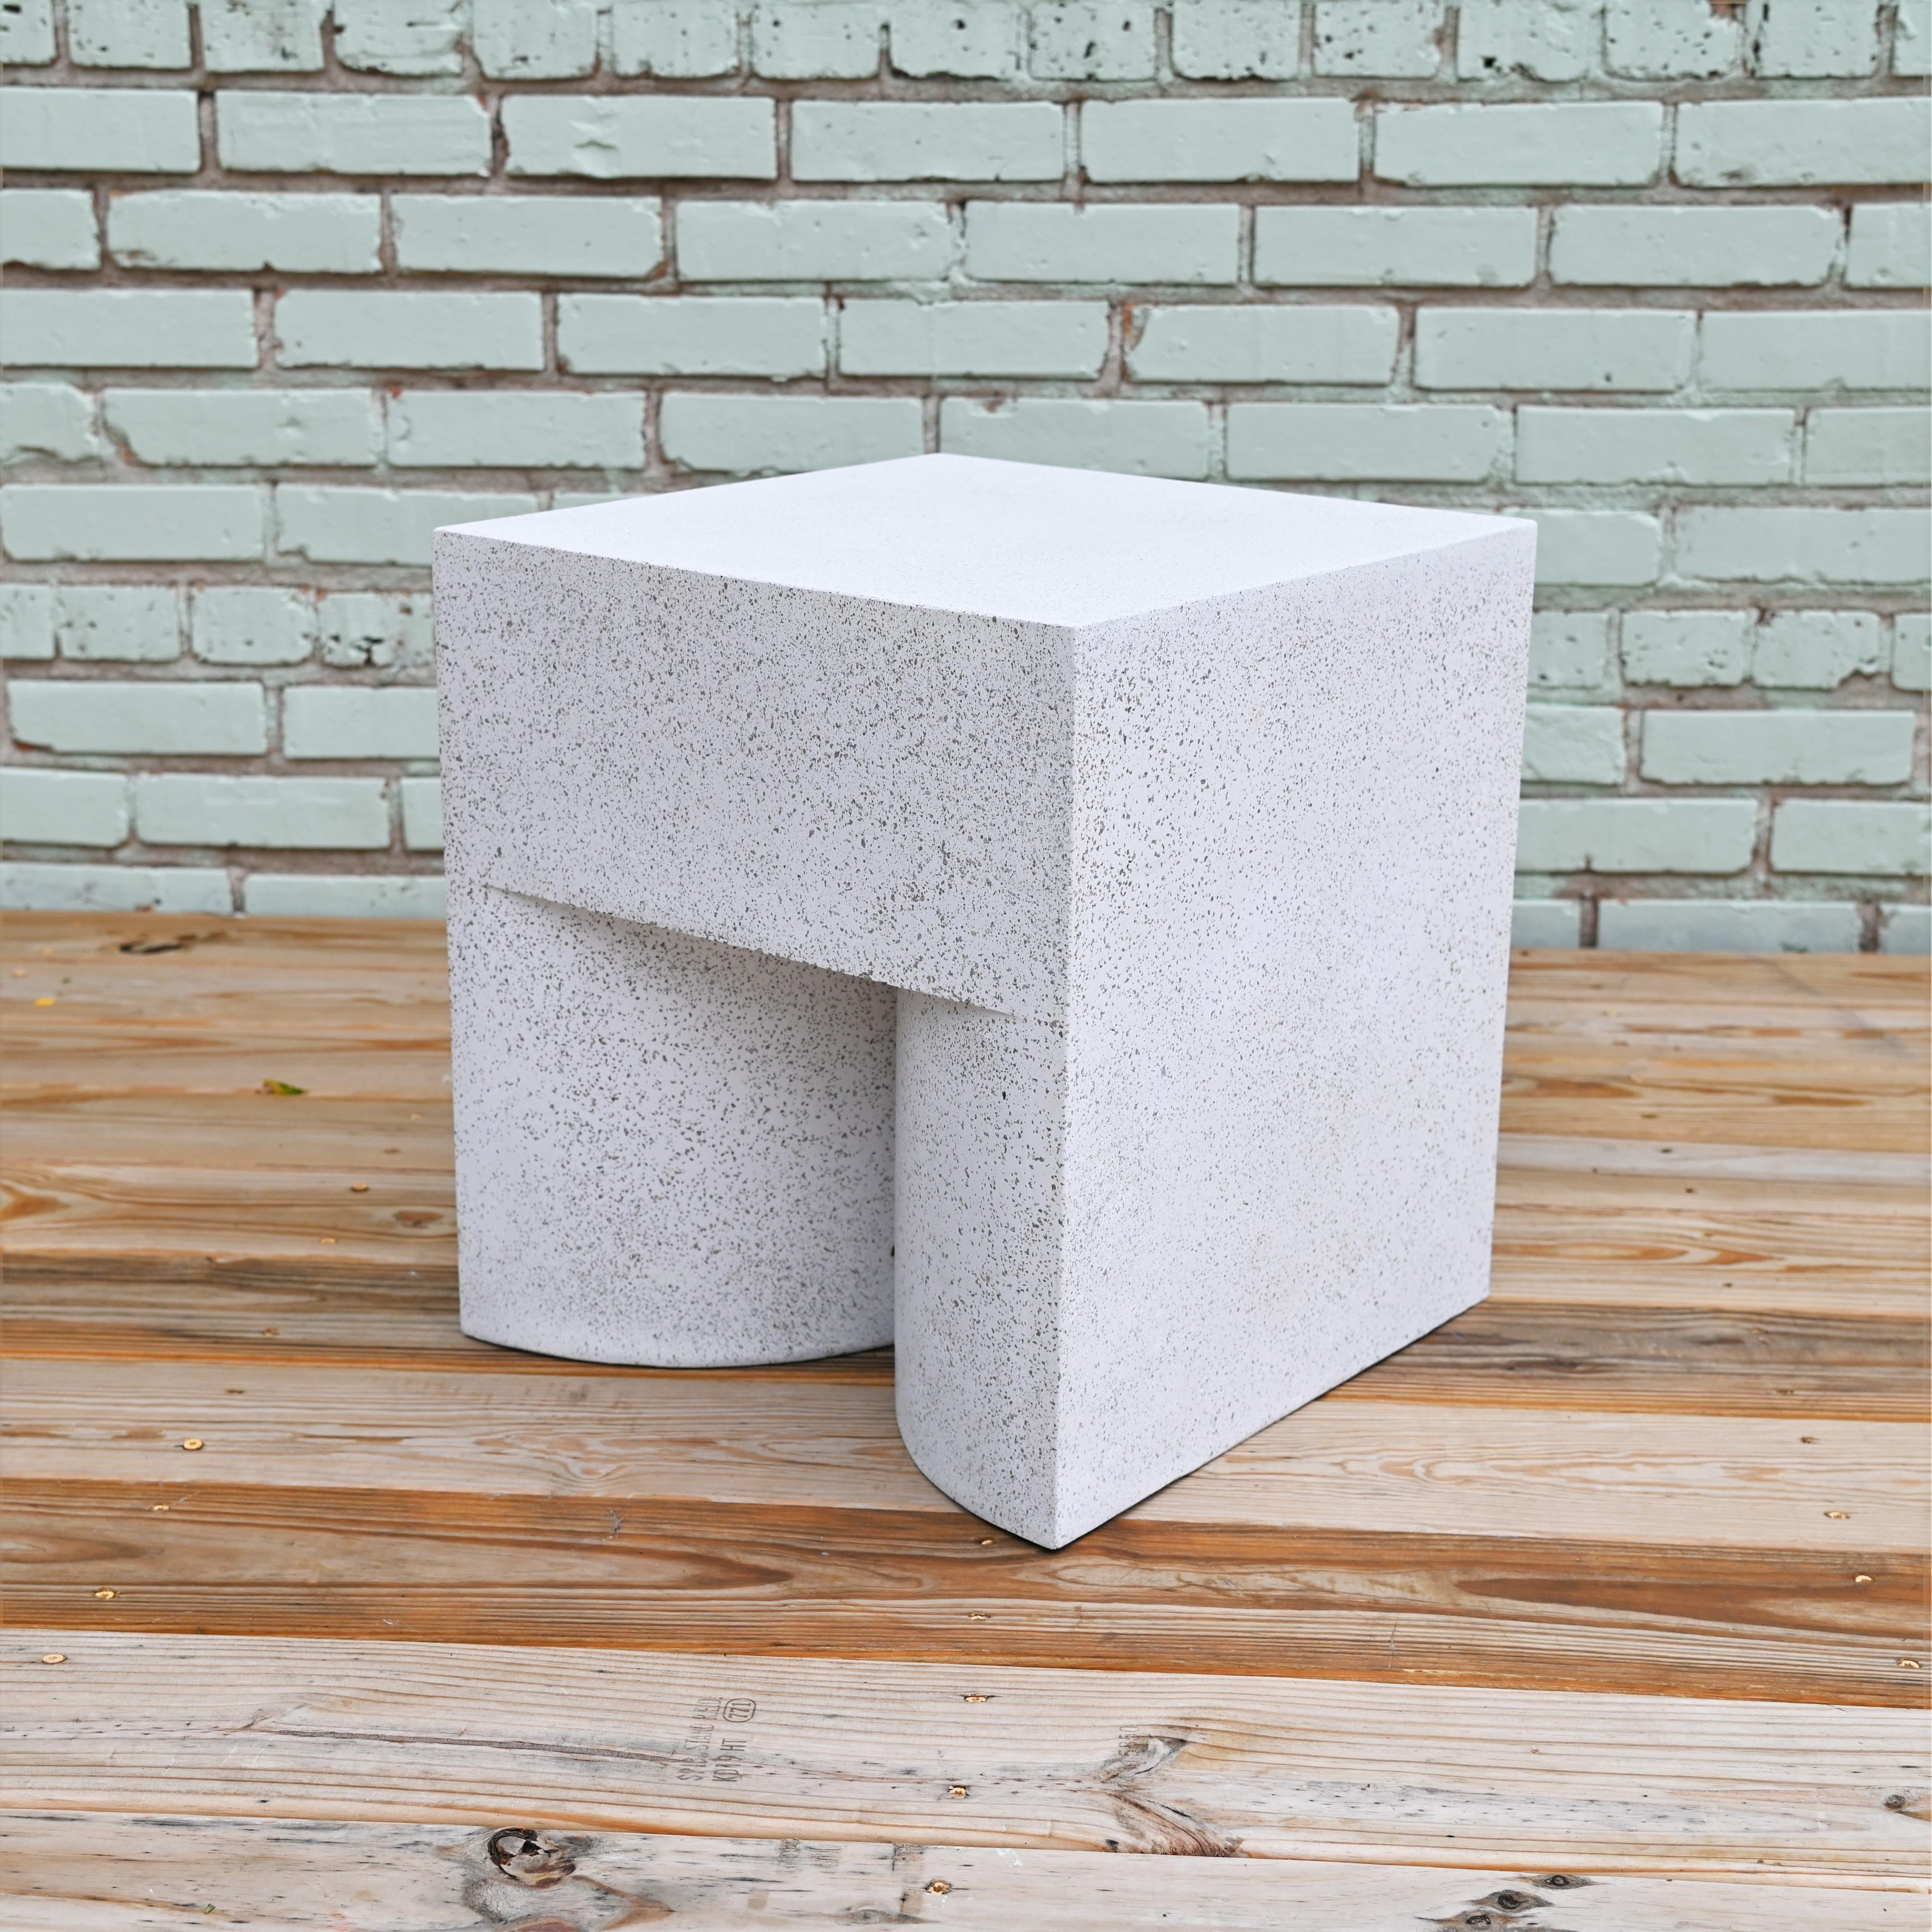 Dimensions: Width 16 in. (41 cm), depth 16 in. (41 cm), height 17.25 in. (44 cm). Weight 20 lbs. (9 kg).

Finish color options:
White stone
Natural stone (shown)
Aged stone
Keystone
Coal stone

Materials: resin, stone aggregate and